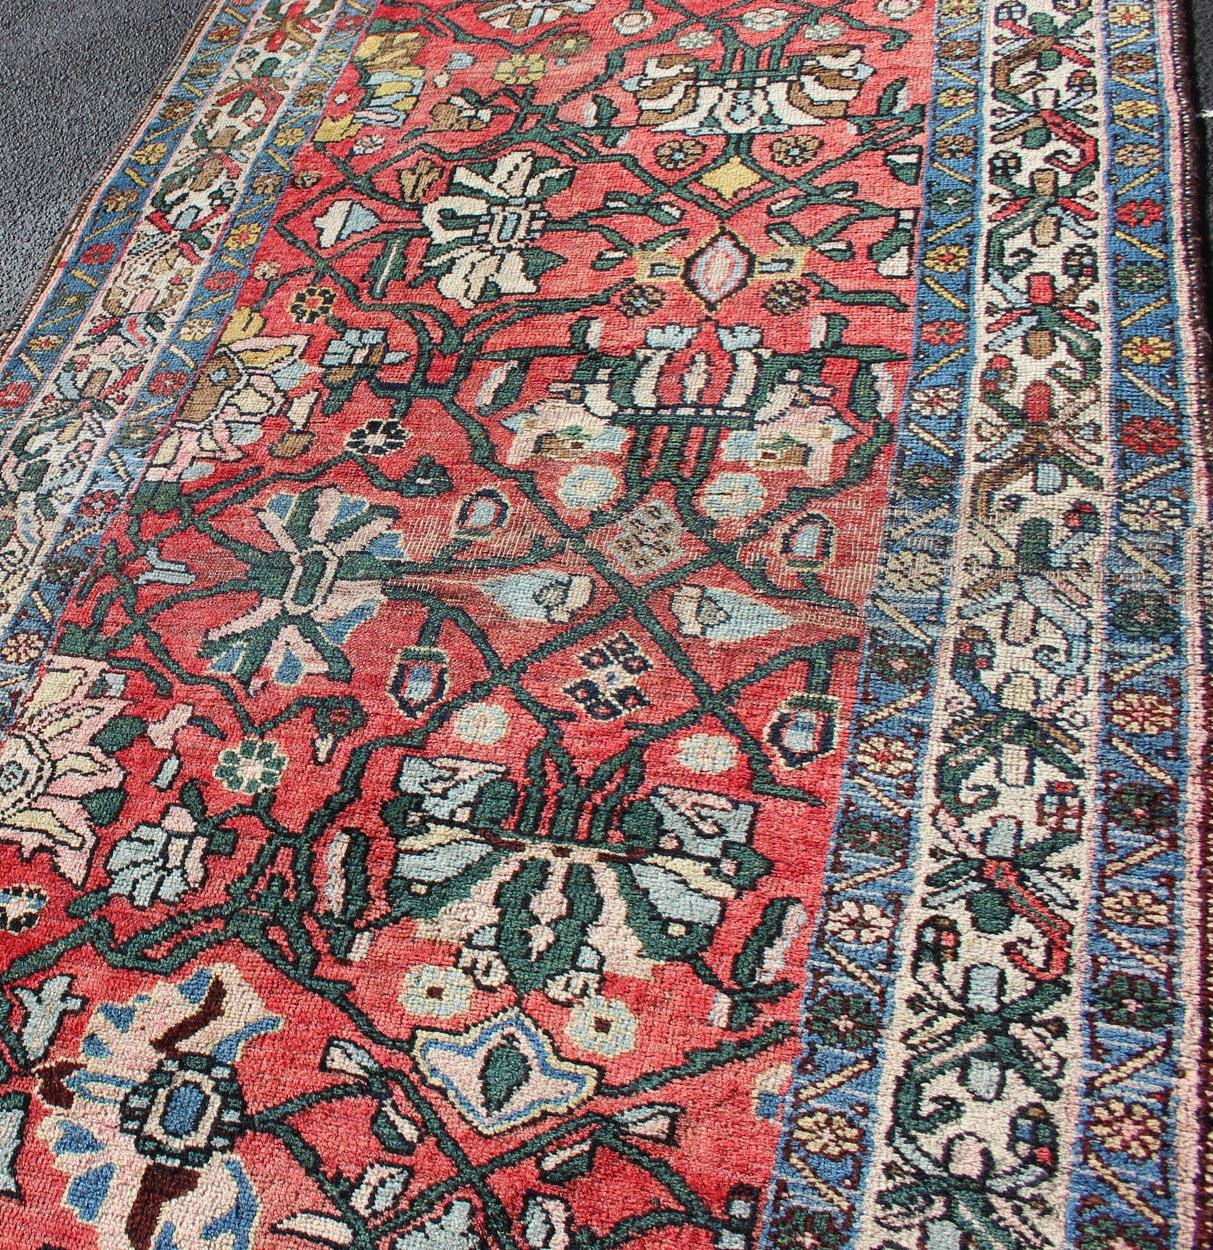 Antique Persian Bidjar Rug with Large Floral Motifs in Soft Red, Green & Blue In Good Condition For Sale In Atlanta, GA